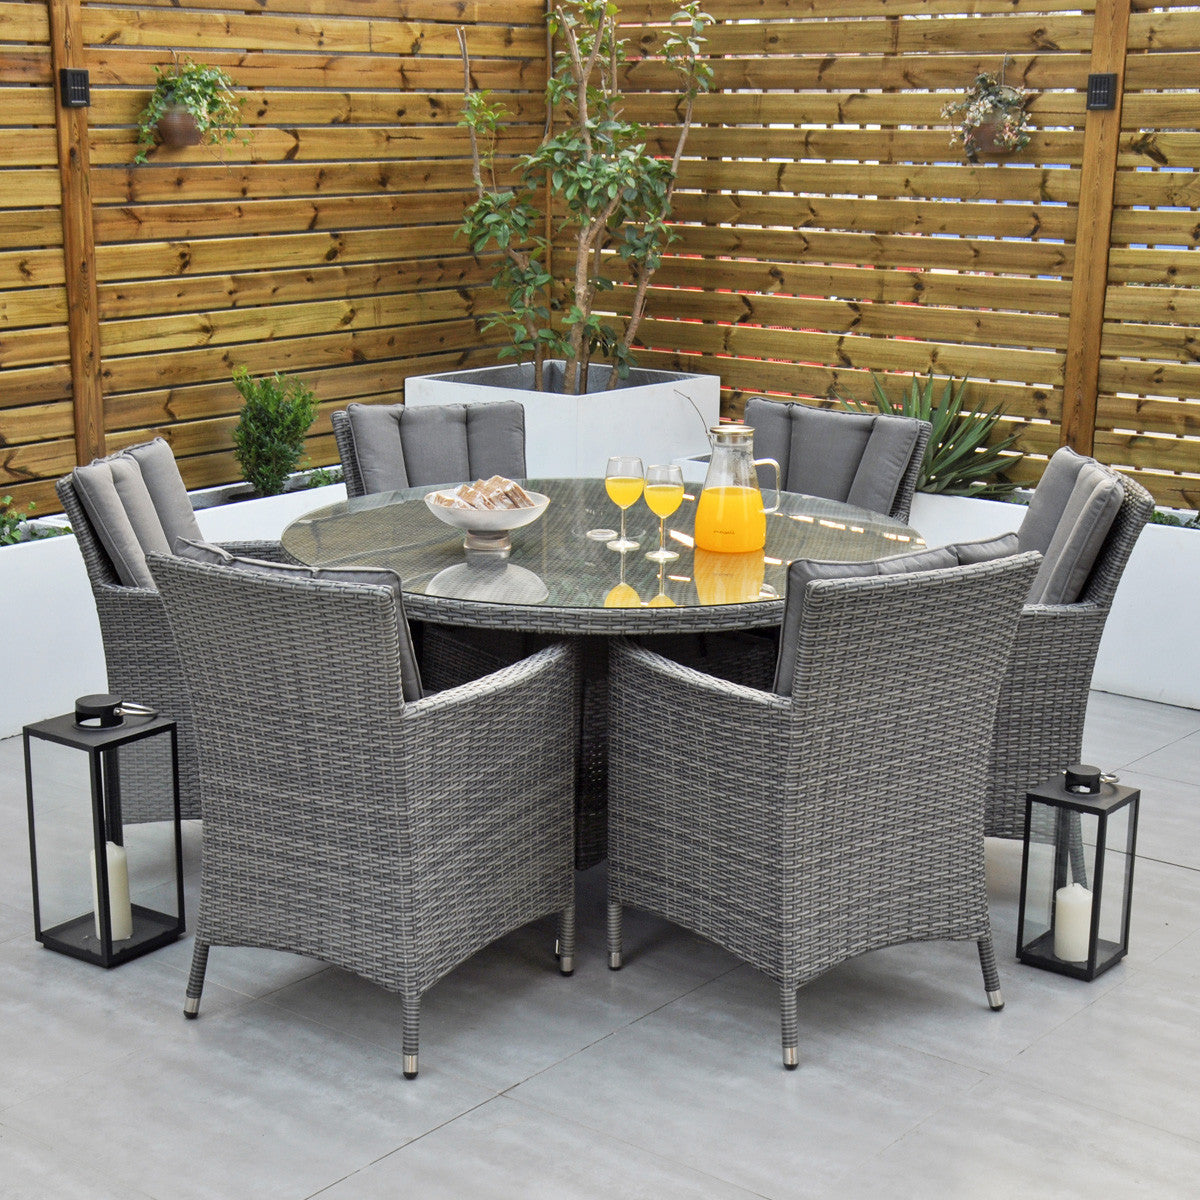 Montreal - 6 Seater Round Set with Lazy Susan